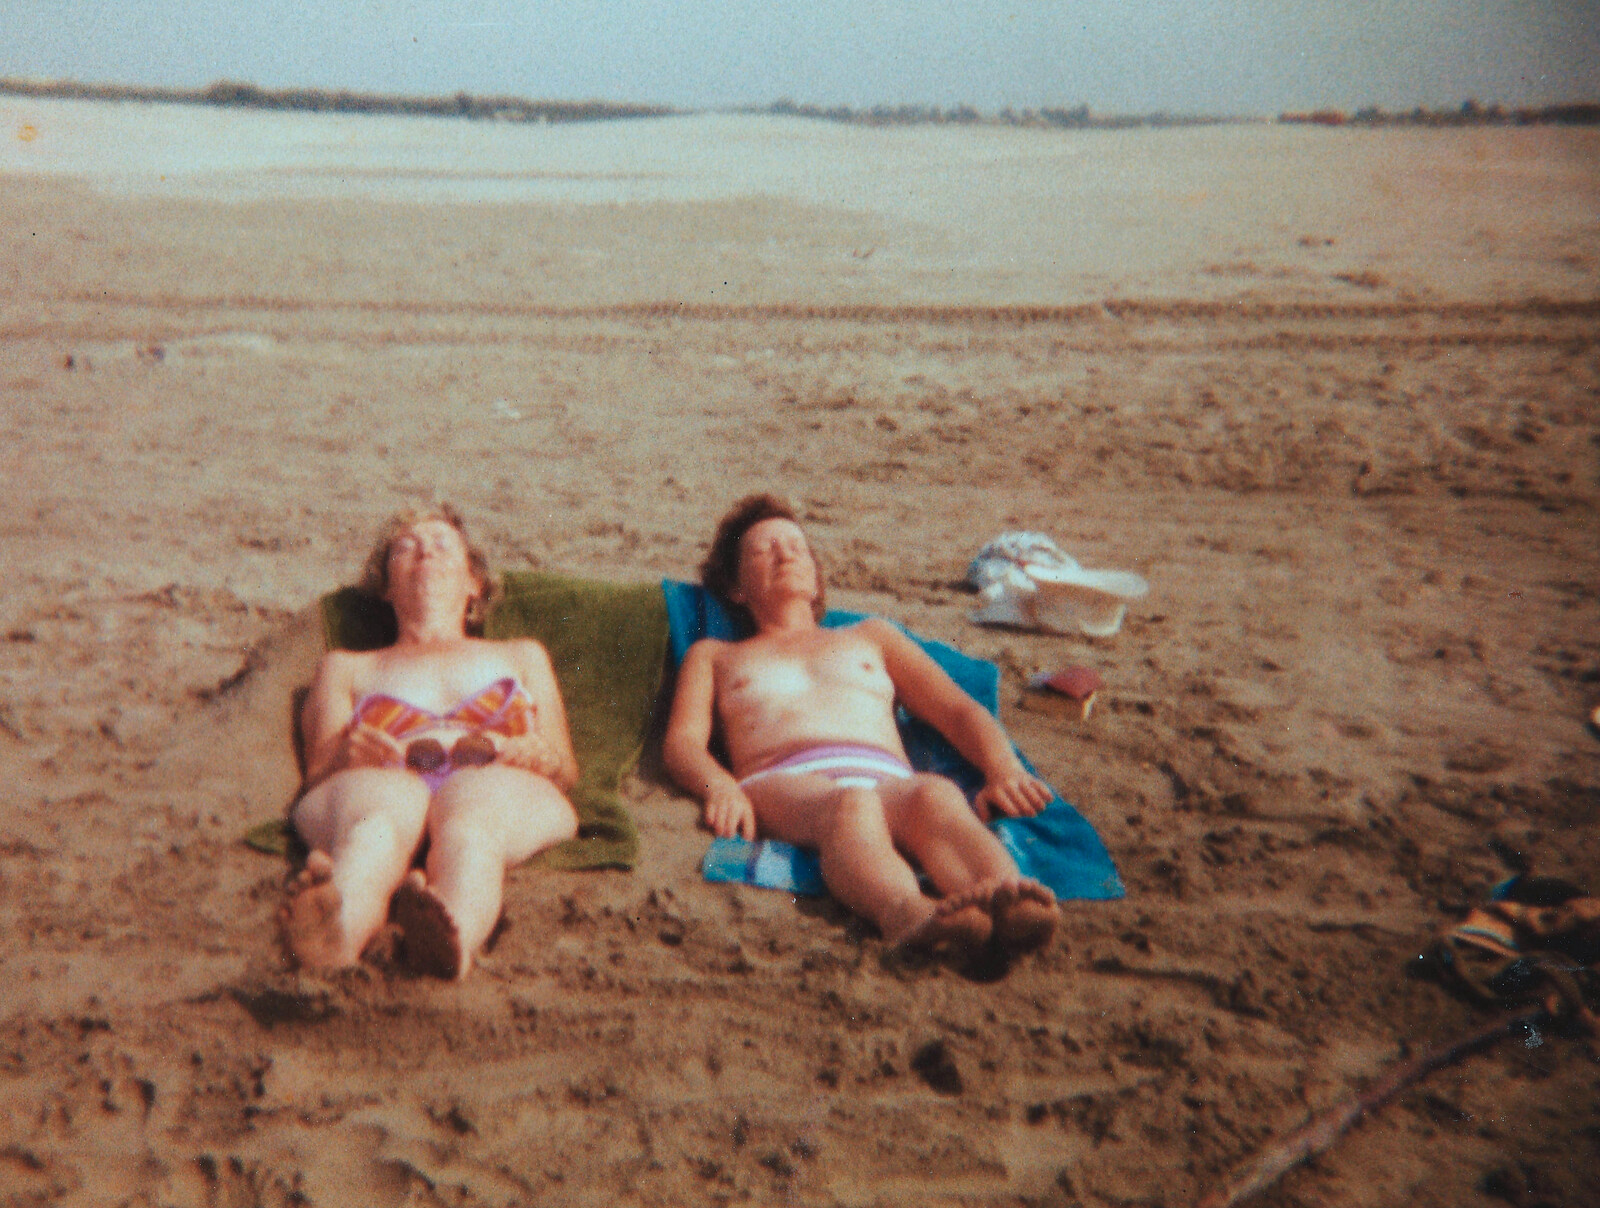 Jean and Pam catch a few rays on the beach from Camping with Sean, The Camargue, South of France, 15th July 1982